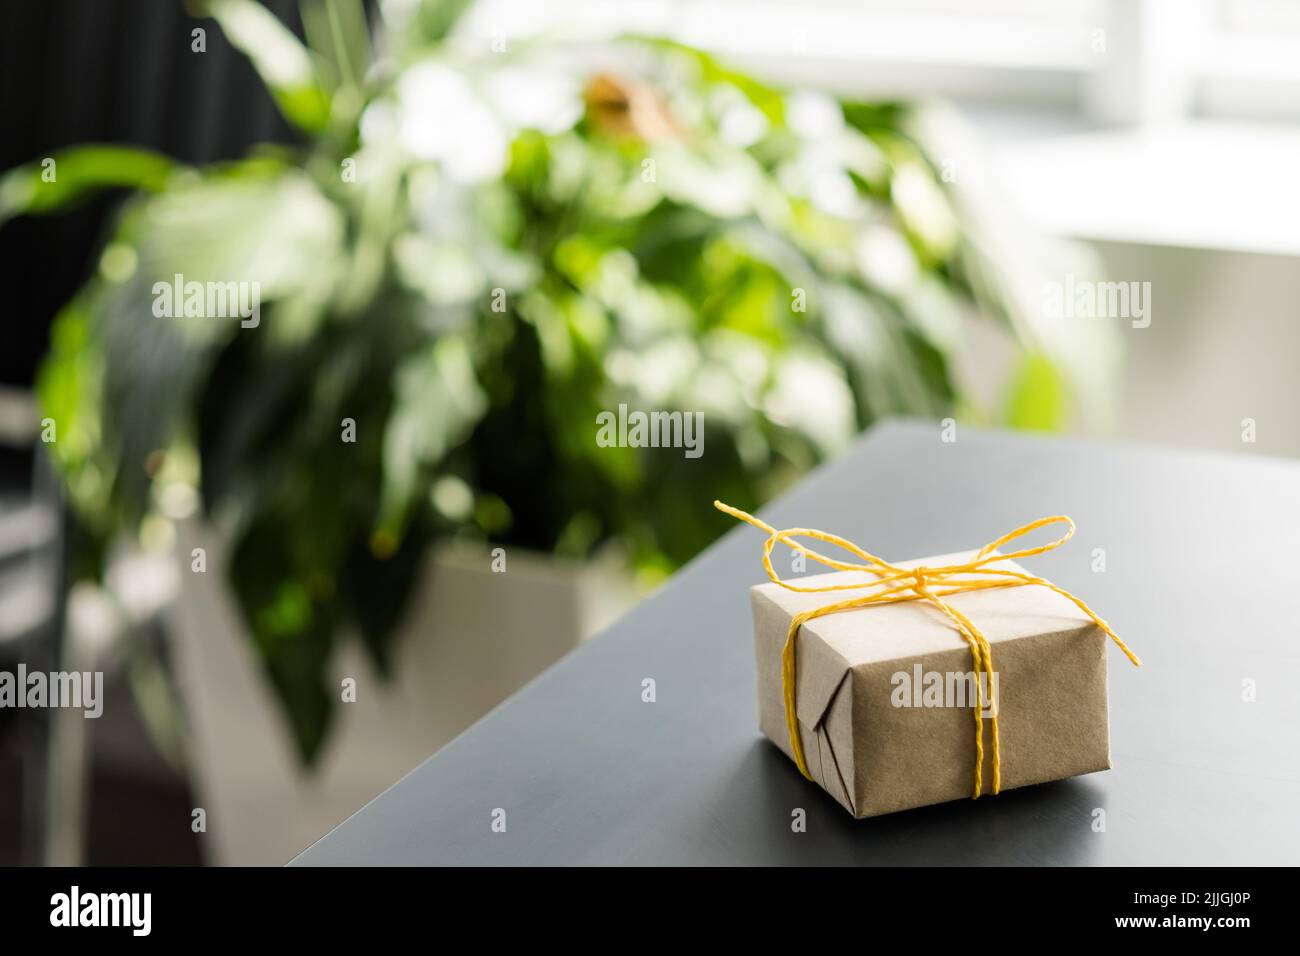 office goods delivery wrapped gift box desk Stock Photo